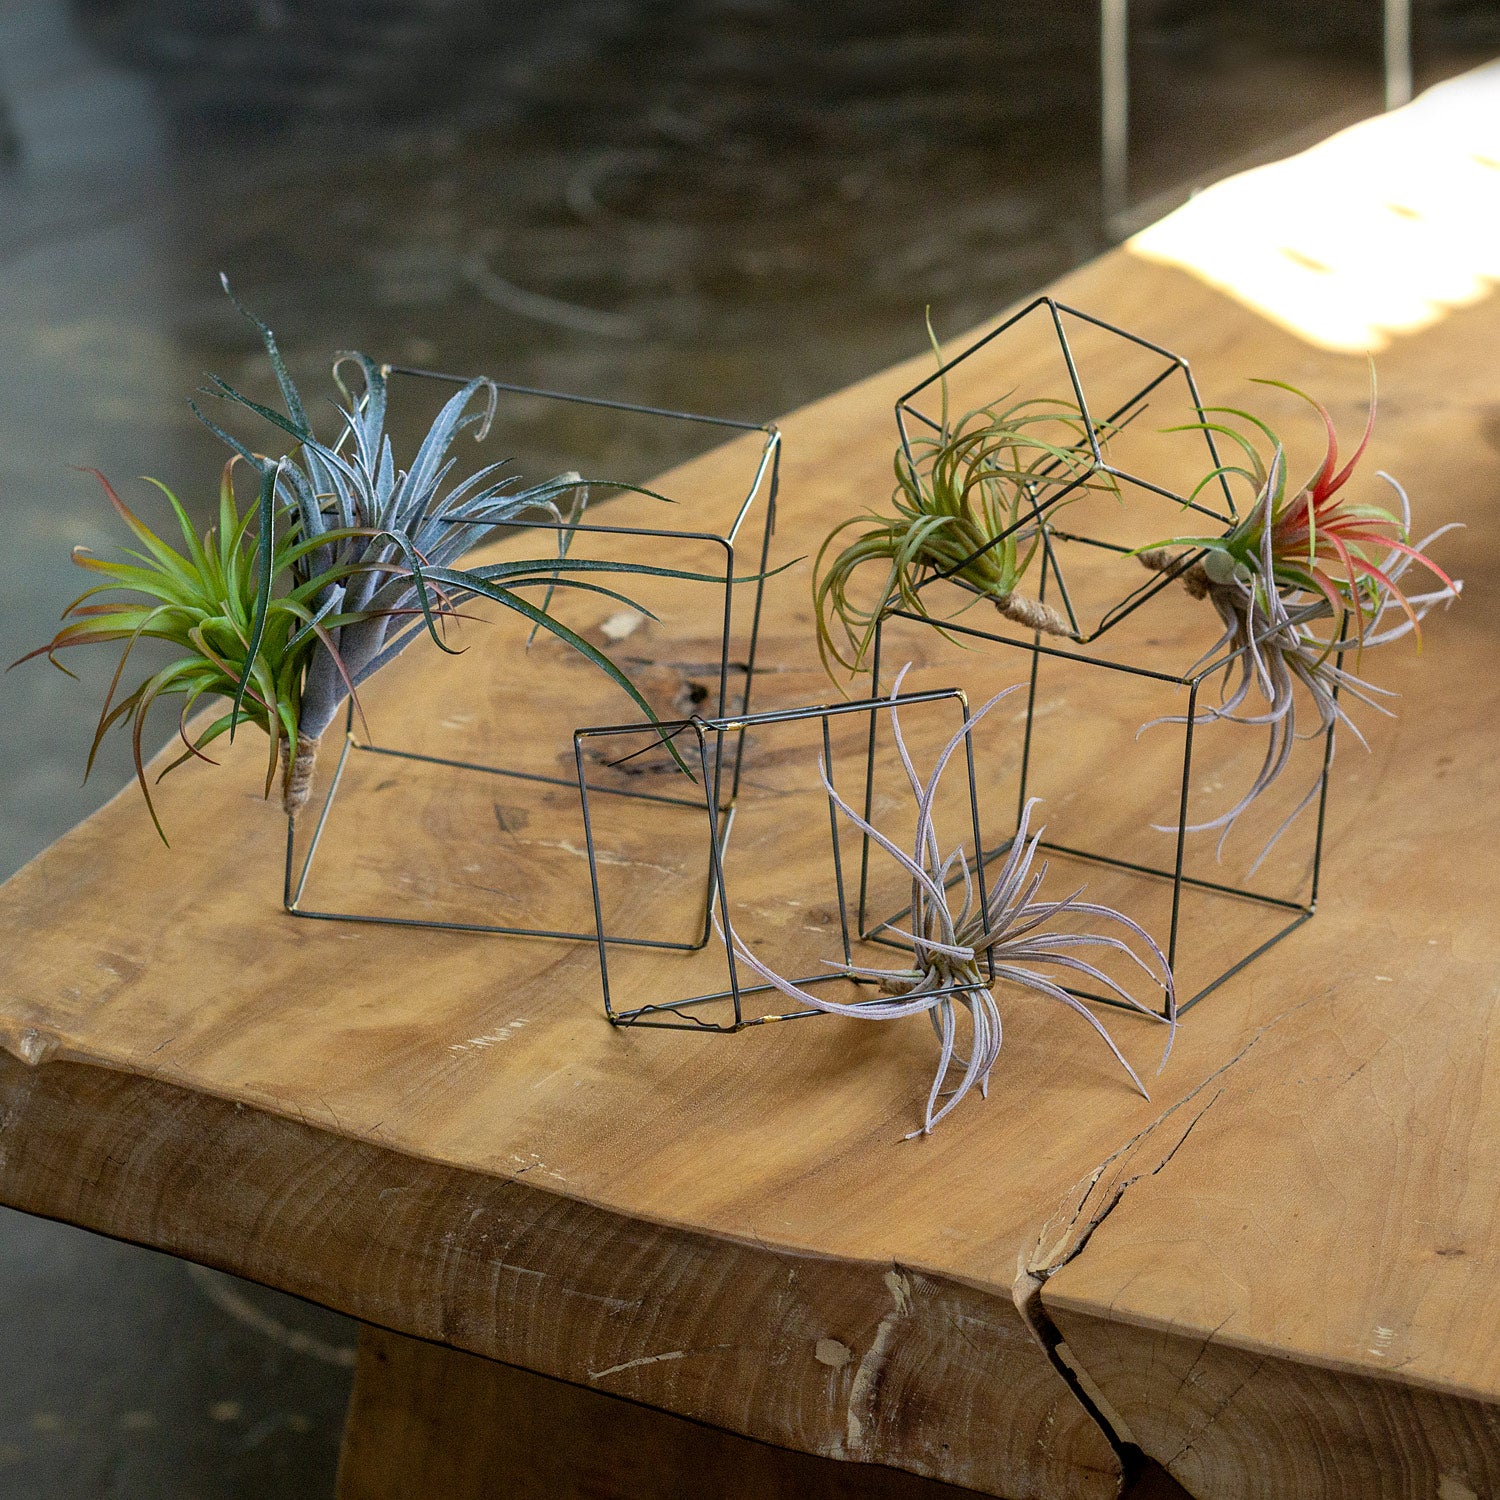 A selection of air plants tied to raw wire cube sculptures on a wood table.